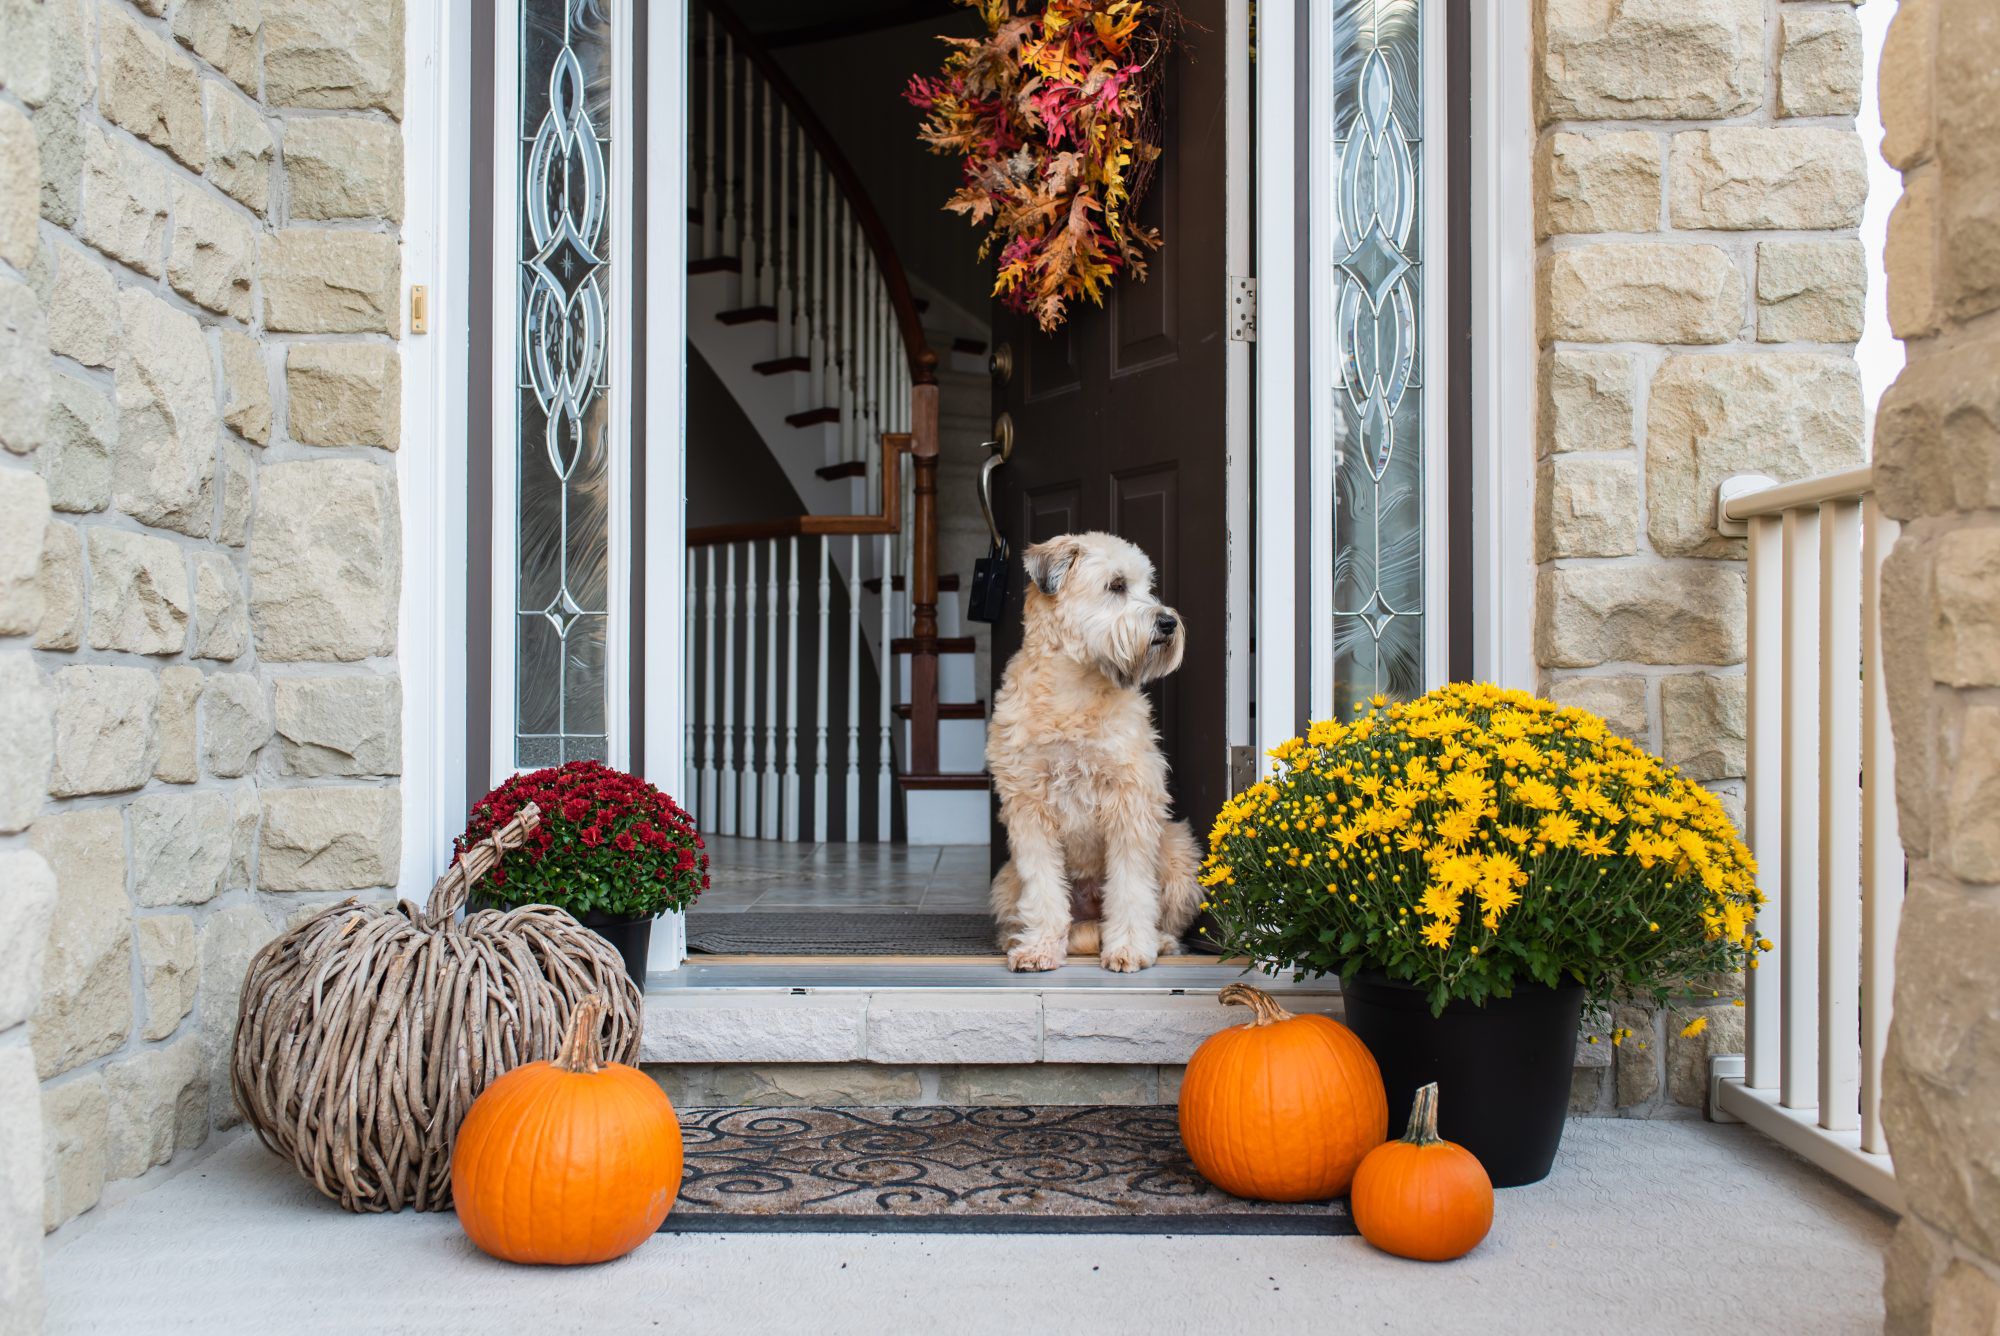 Fall Decor Pieces For Your Front Porch Starting at $10